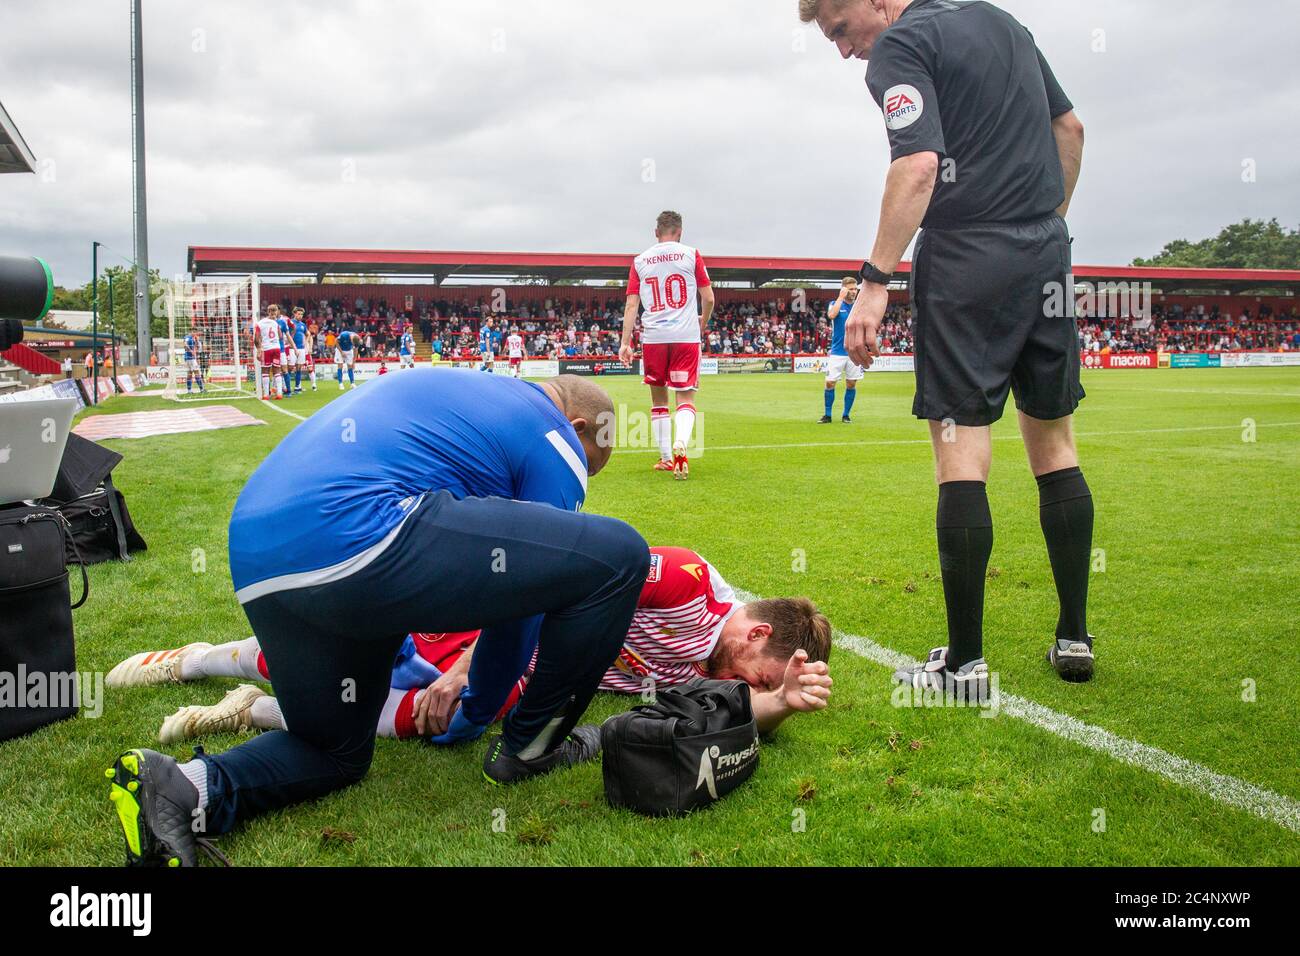 Football / soccer player receiving treatment from physio after getting injured during match at professional league game. Stock Photo